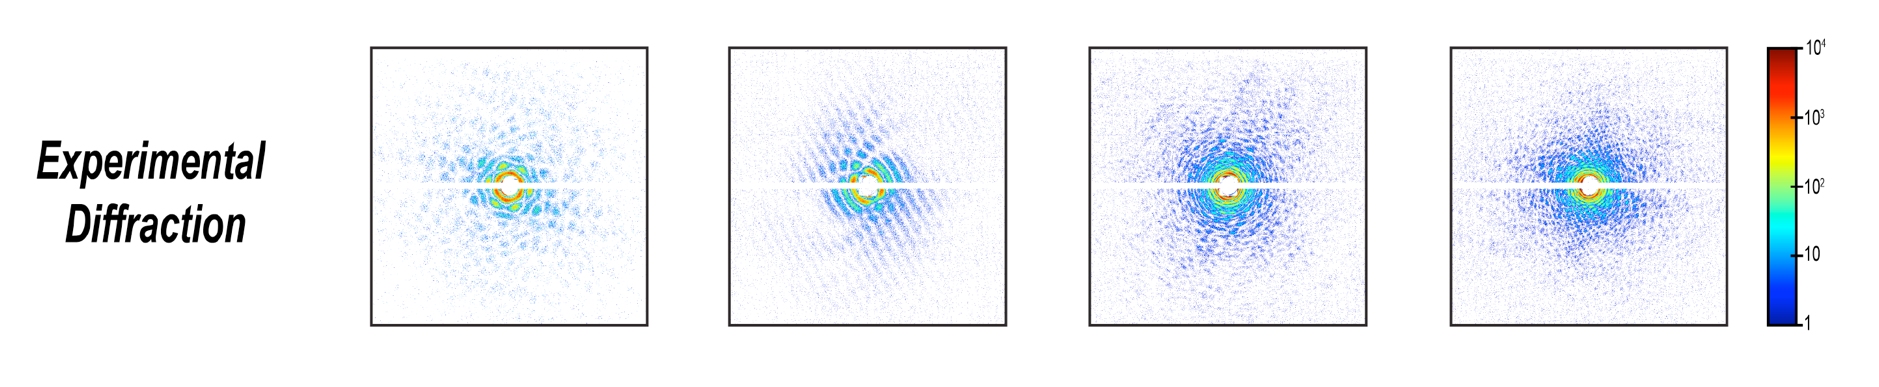 Fig. 2 (Click to enlarge). Experimental diffraction image of xenon-doped superfluid helium droplets (radius 100-300 nm).